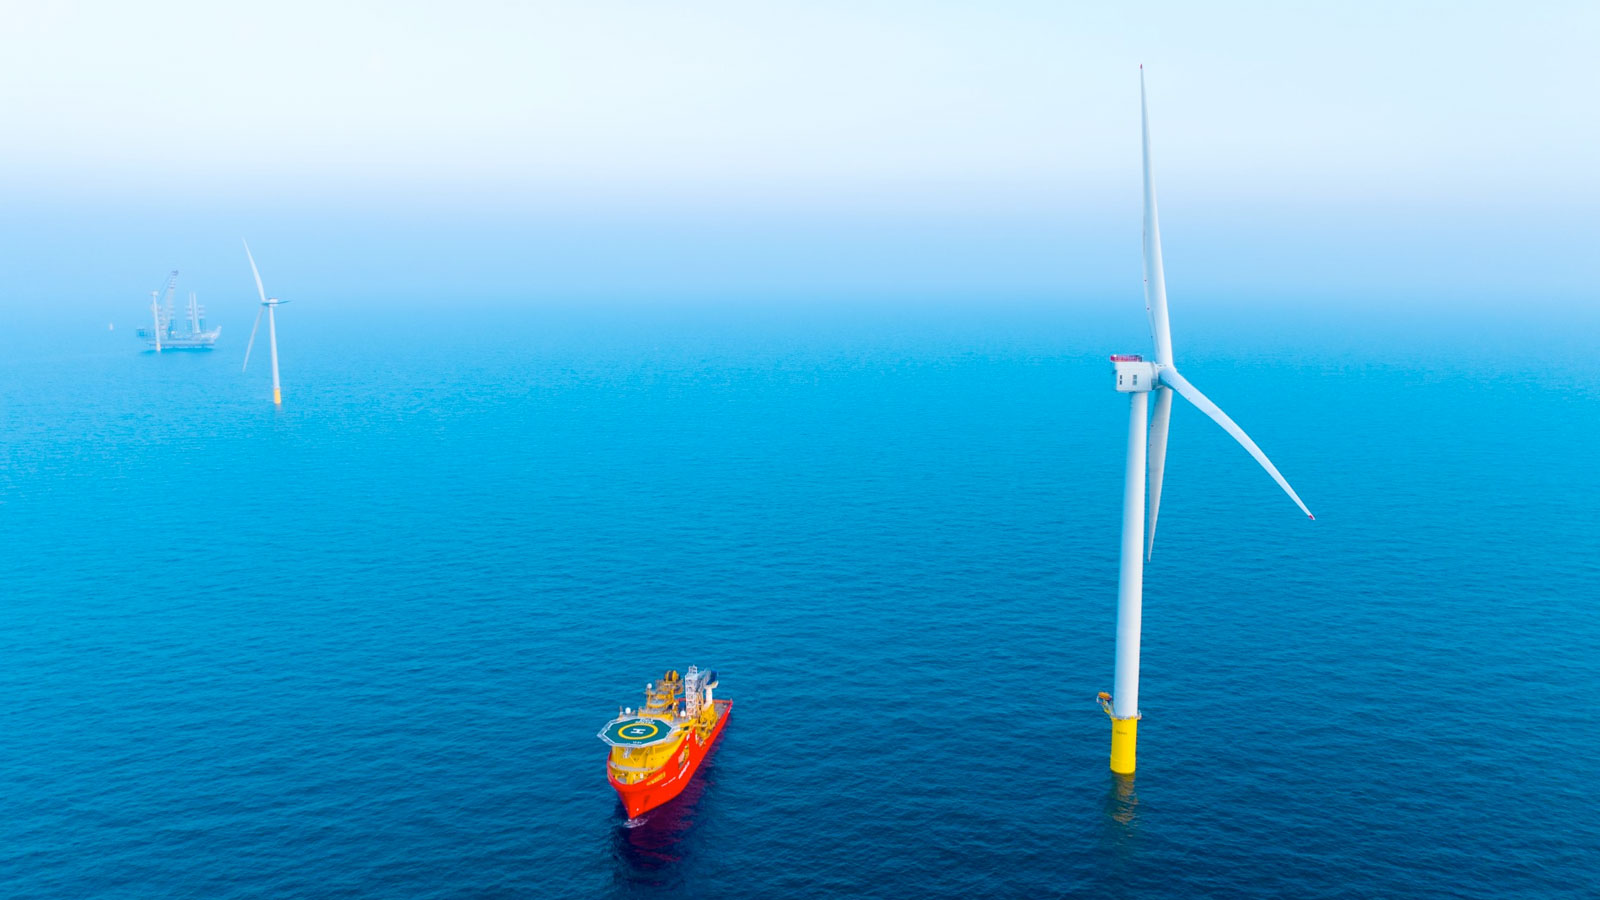 The Dogger Bank Wind Farm, which will be the largest offshore wind farm in the world, has delivered power to the UK electricity grid for the first time.